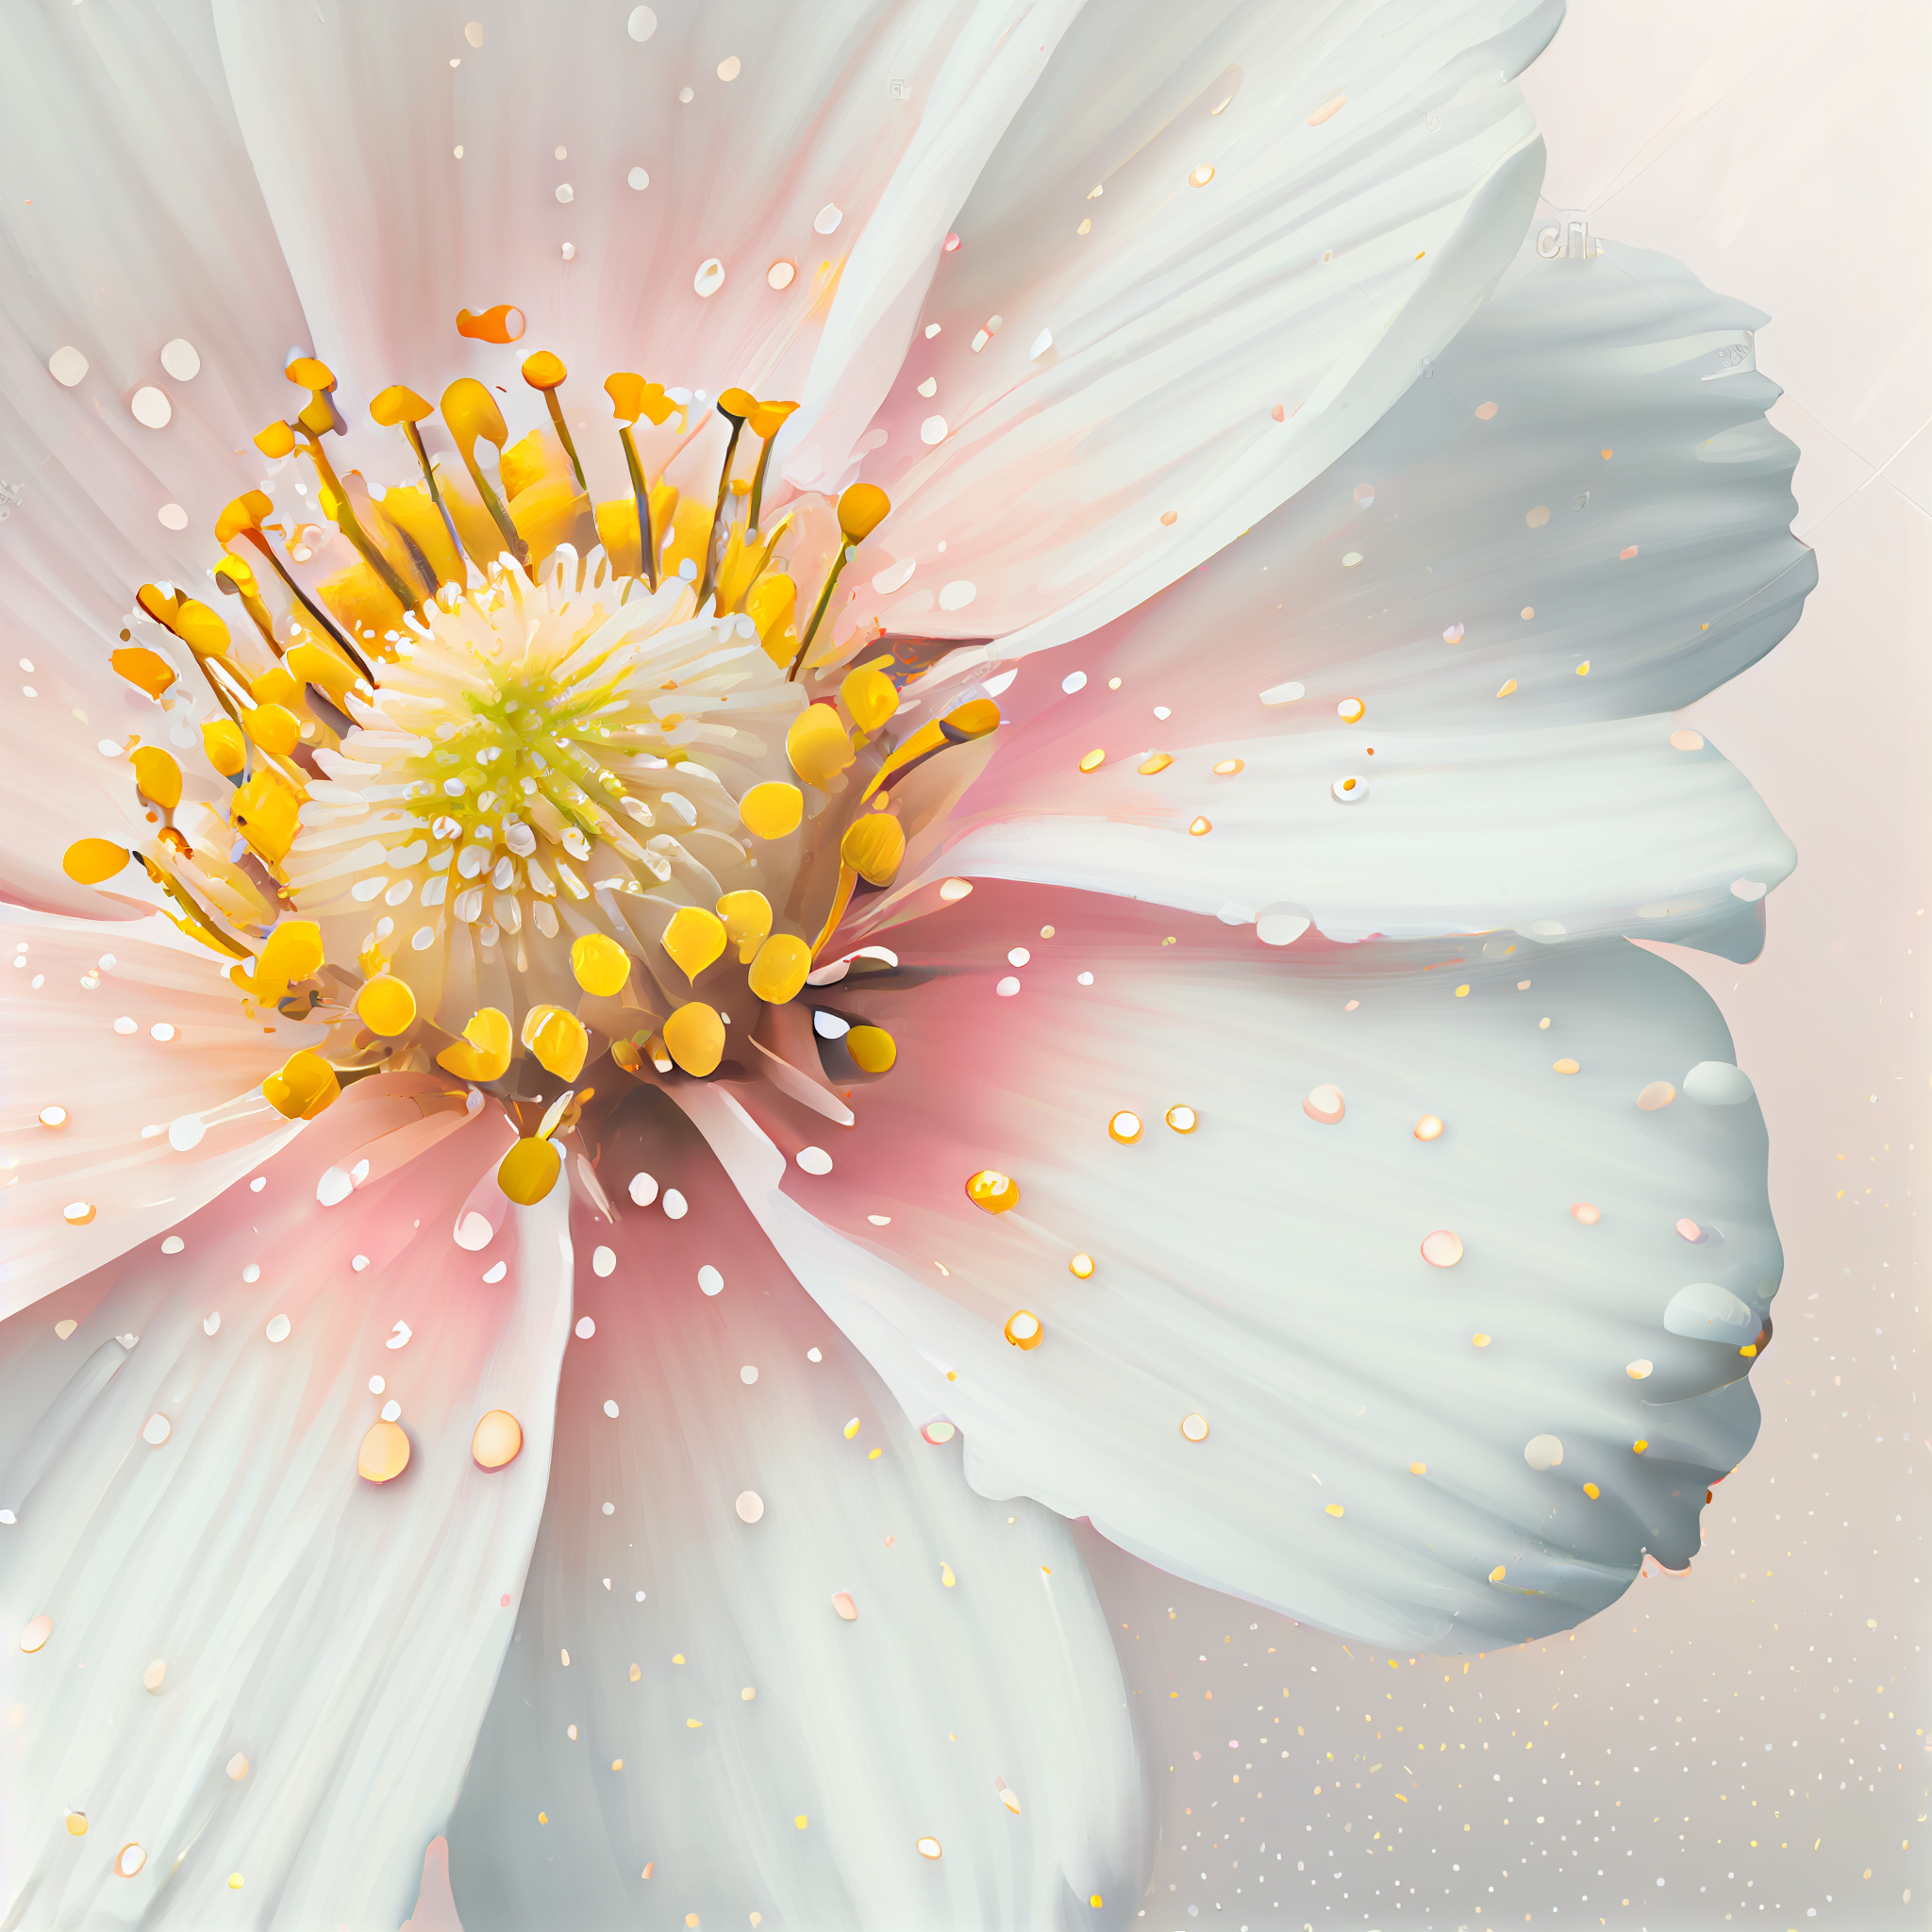 Graceful Beauty Print: Close-up of a Pure White Flower with Pastel Pink Accents Oil Colors